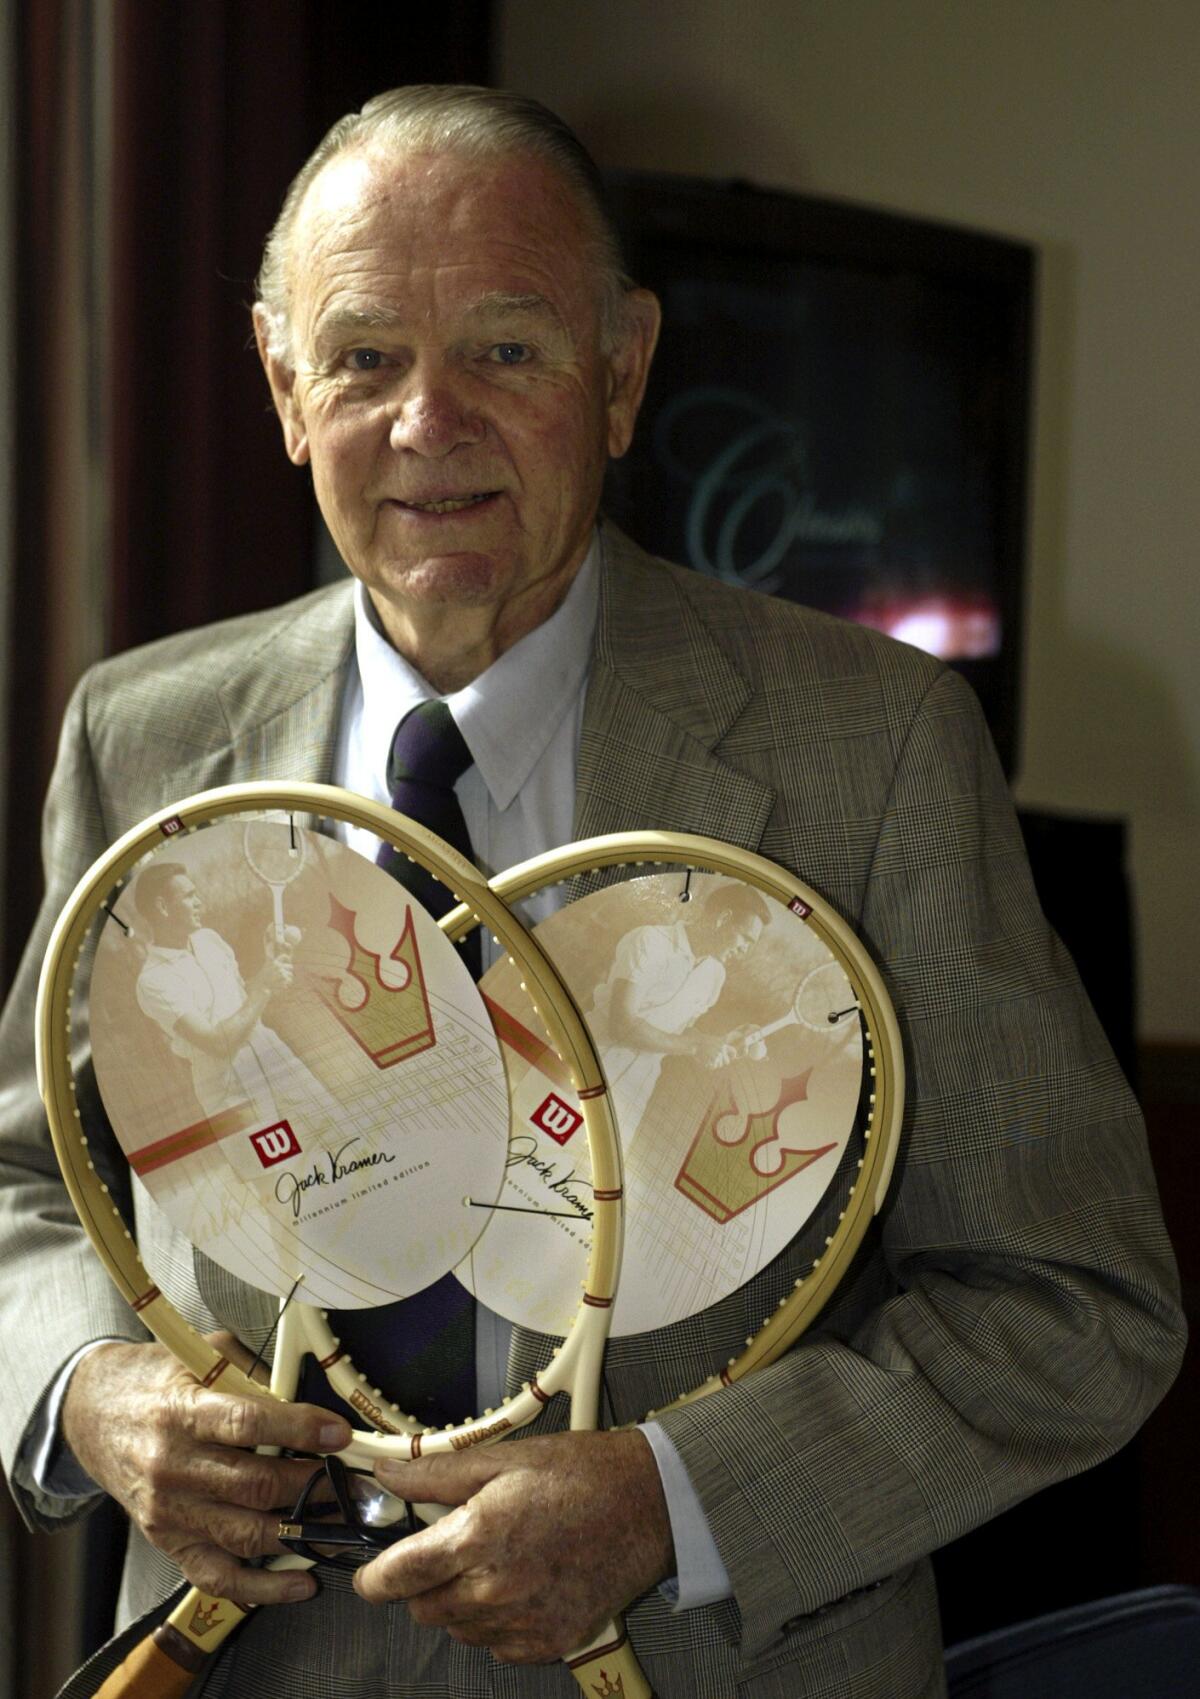 Jack Kramer holds a pair of his signature Wilson rackets in 2003. Kramer died in 2009 at the age of 88.